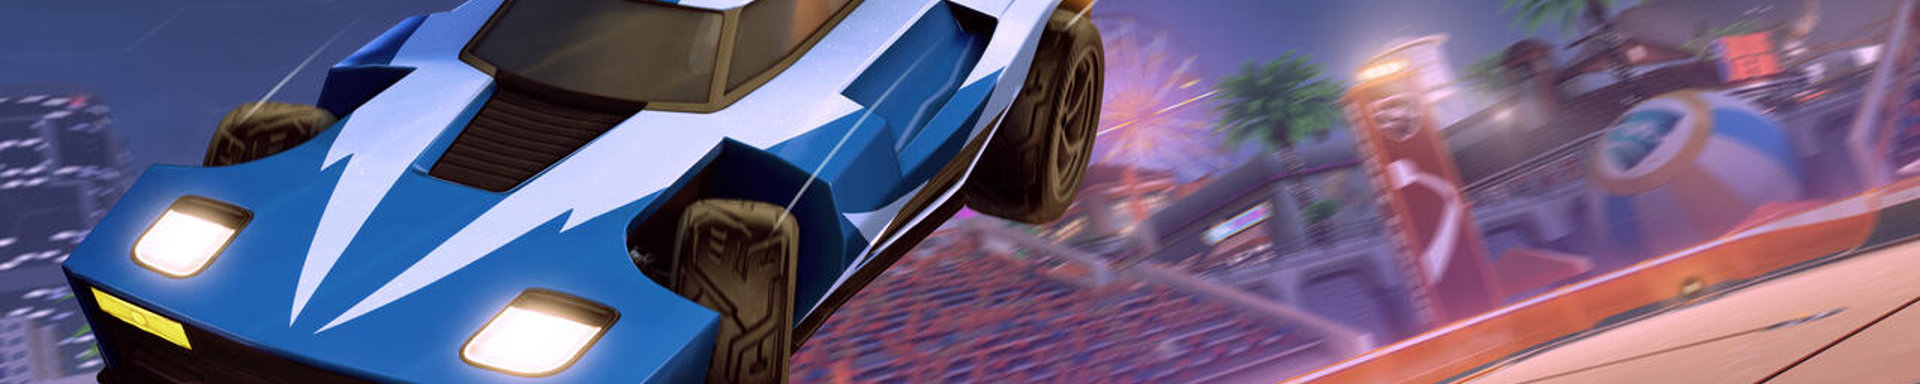 Rocket League free-to-play release date Summer 2020 slice